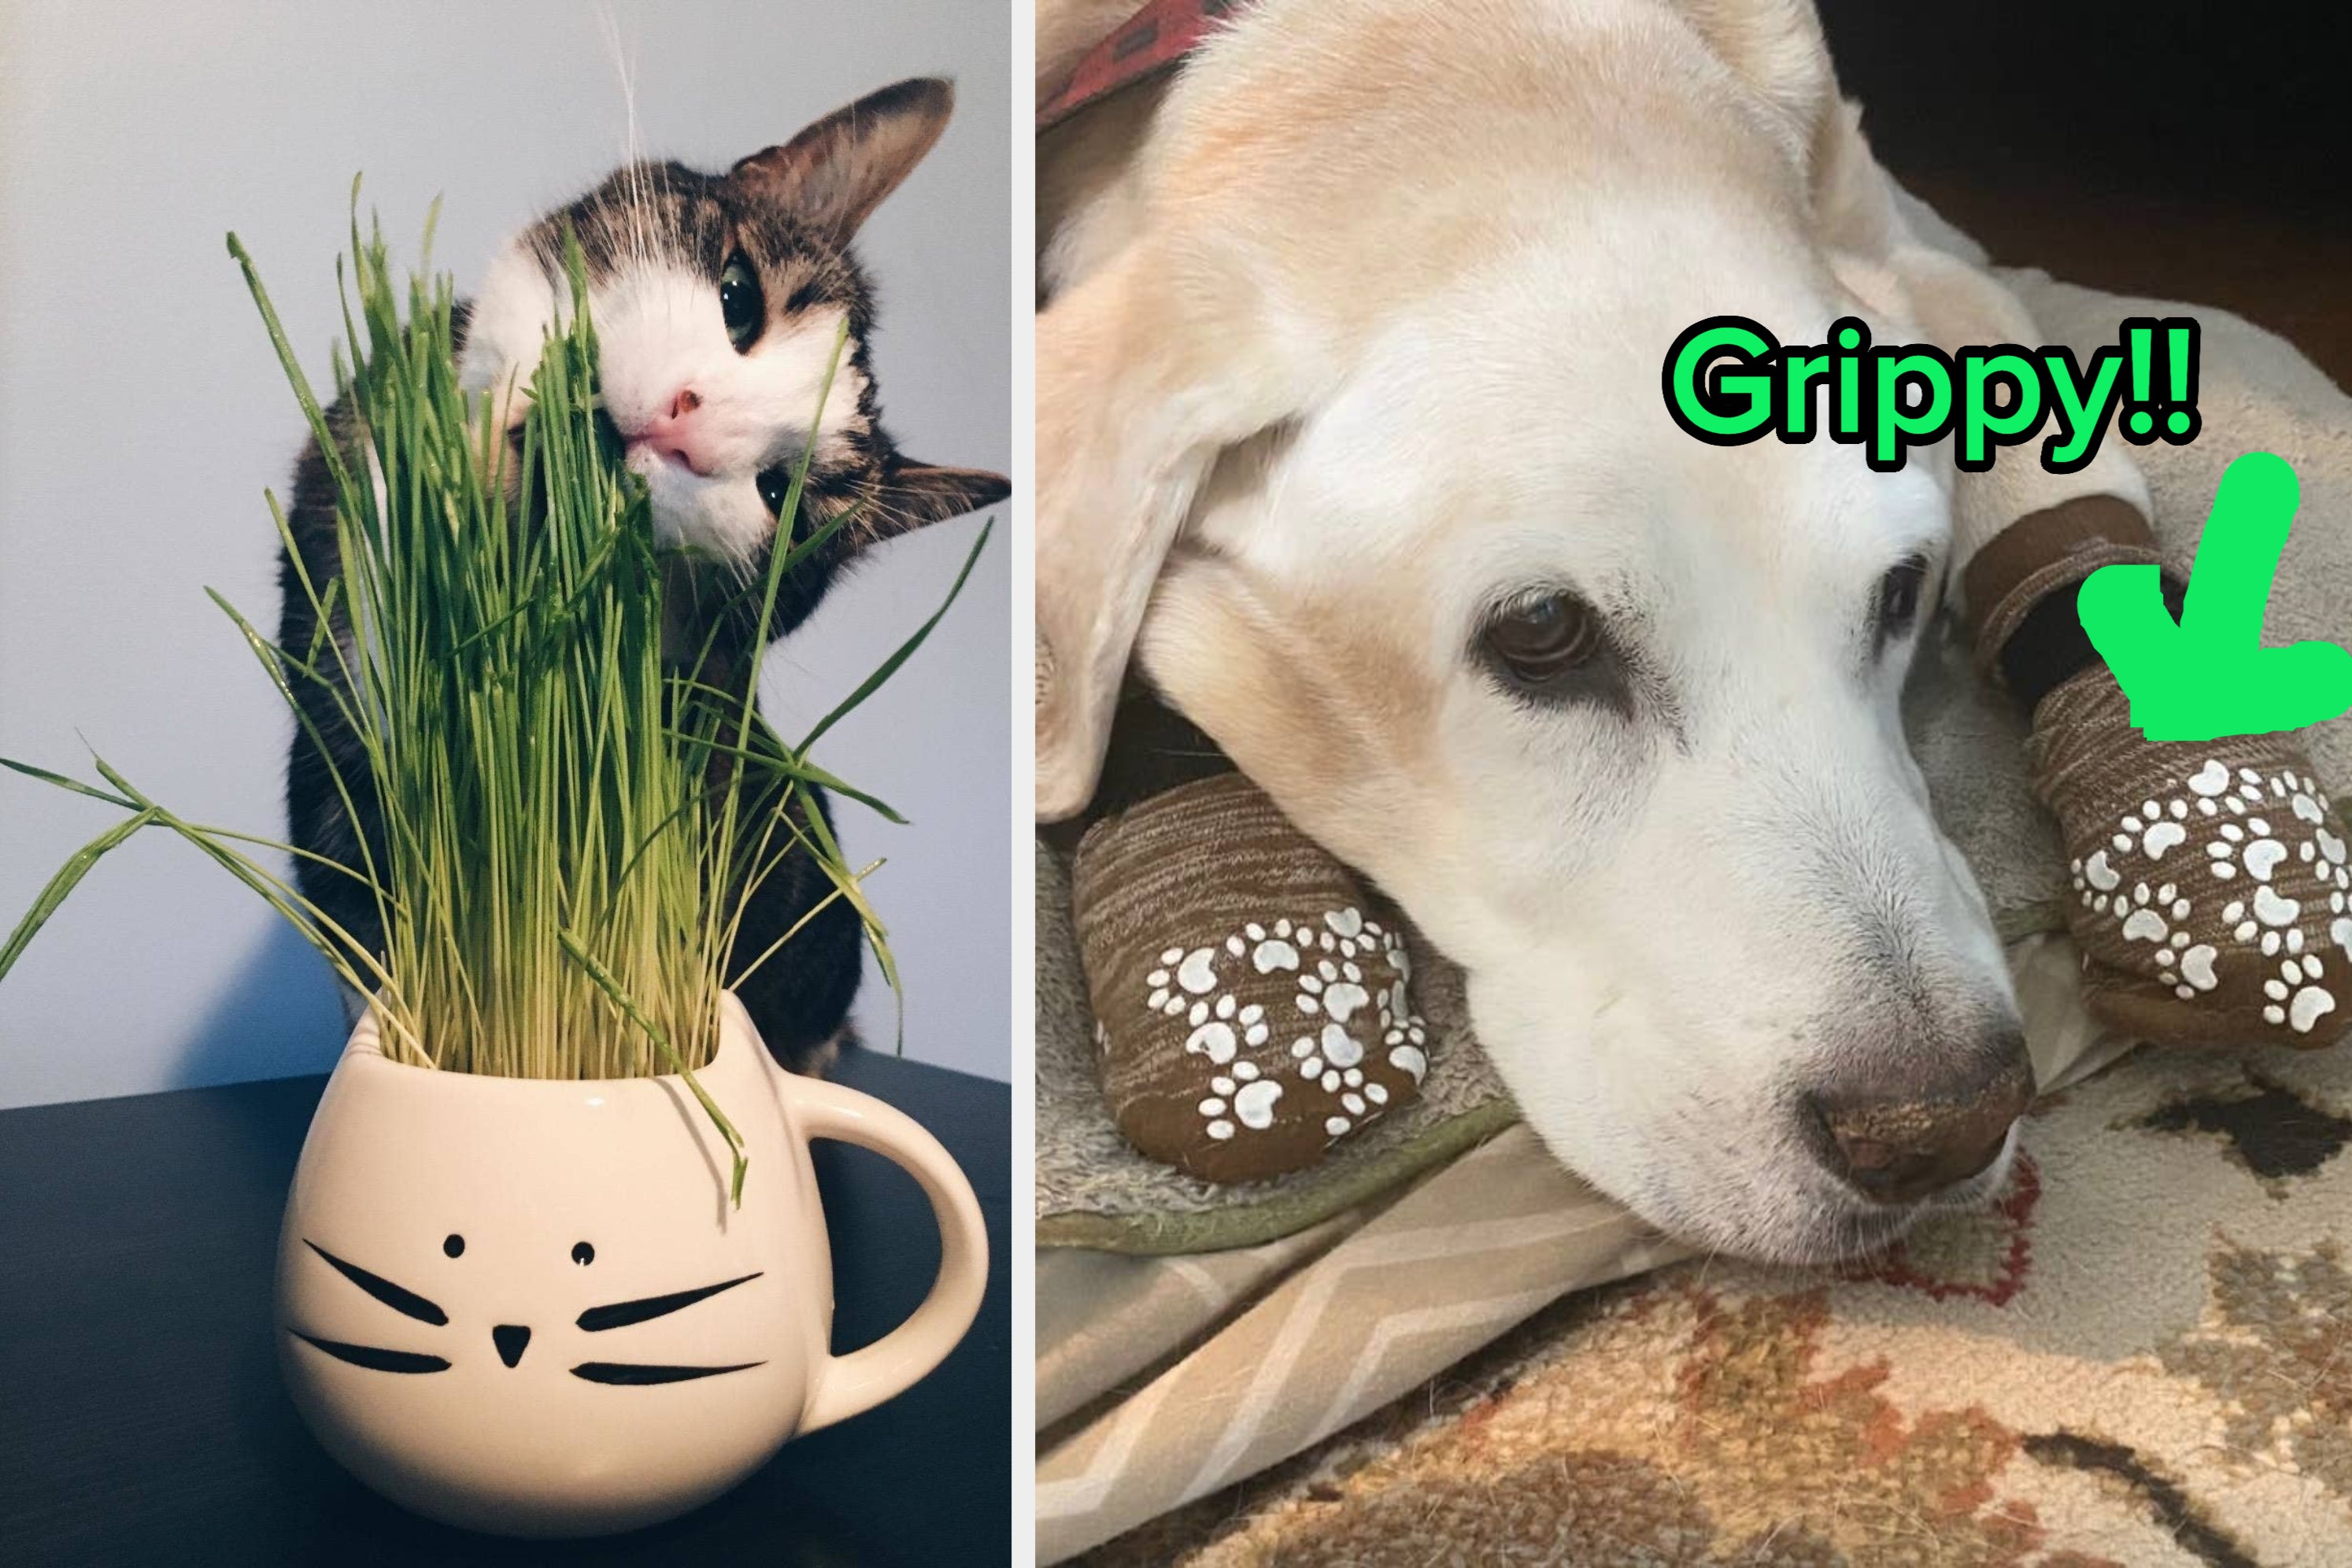 33 Products To Solve All Your Most Bewildering Pet Parenting Dilemmas